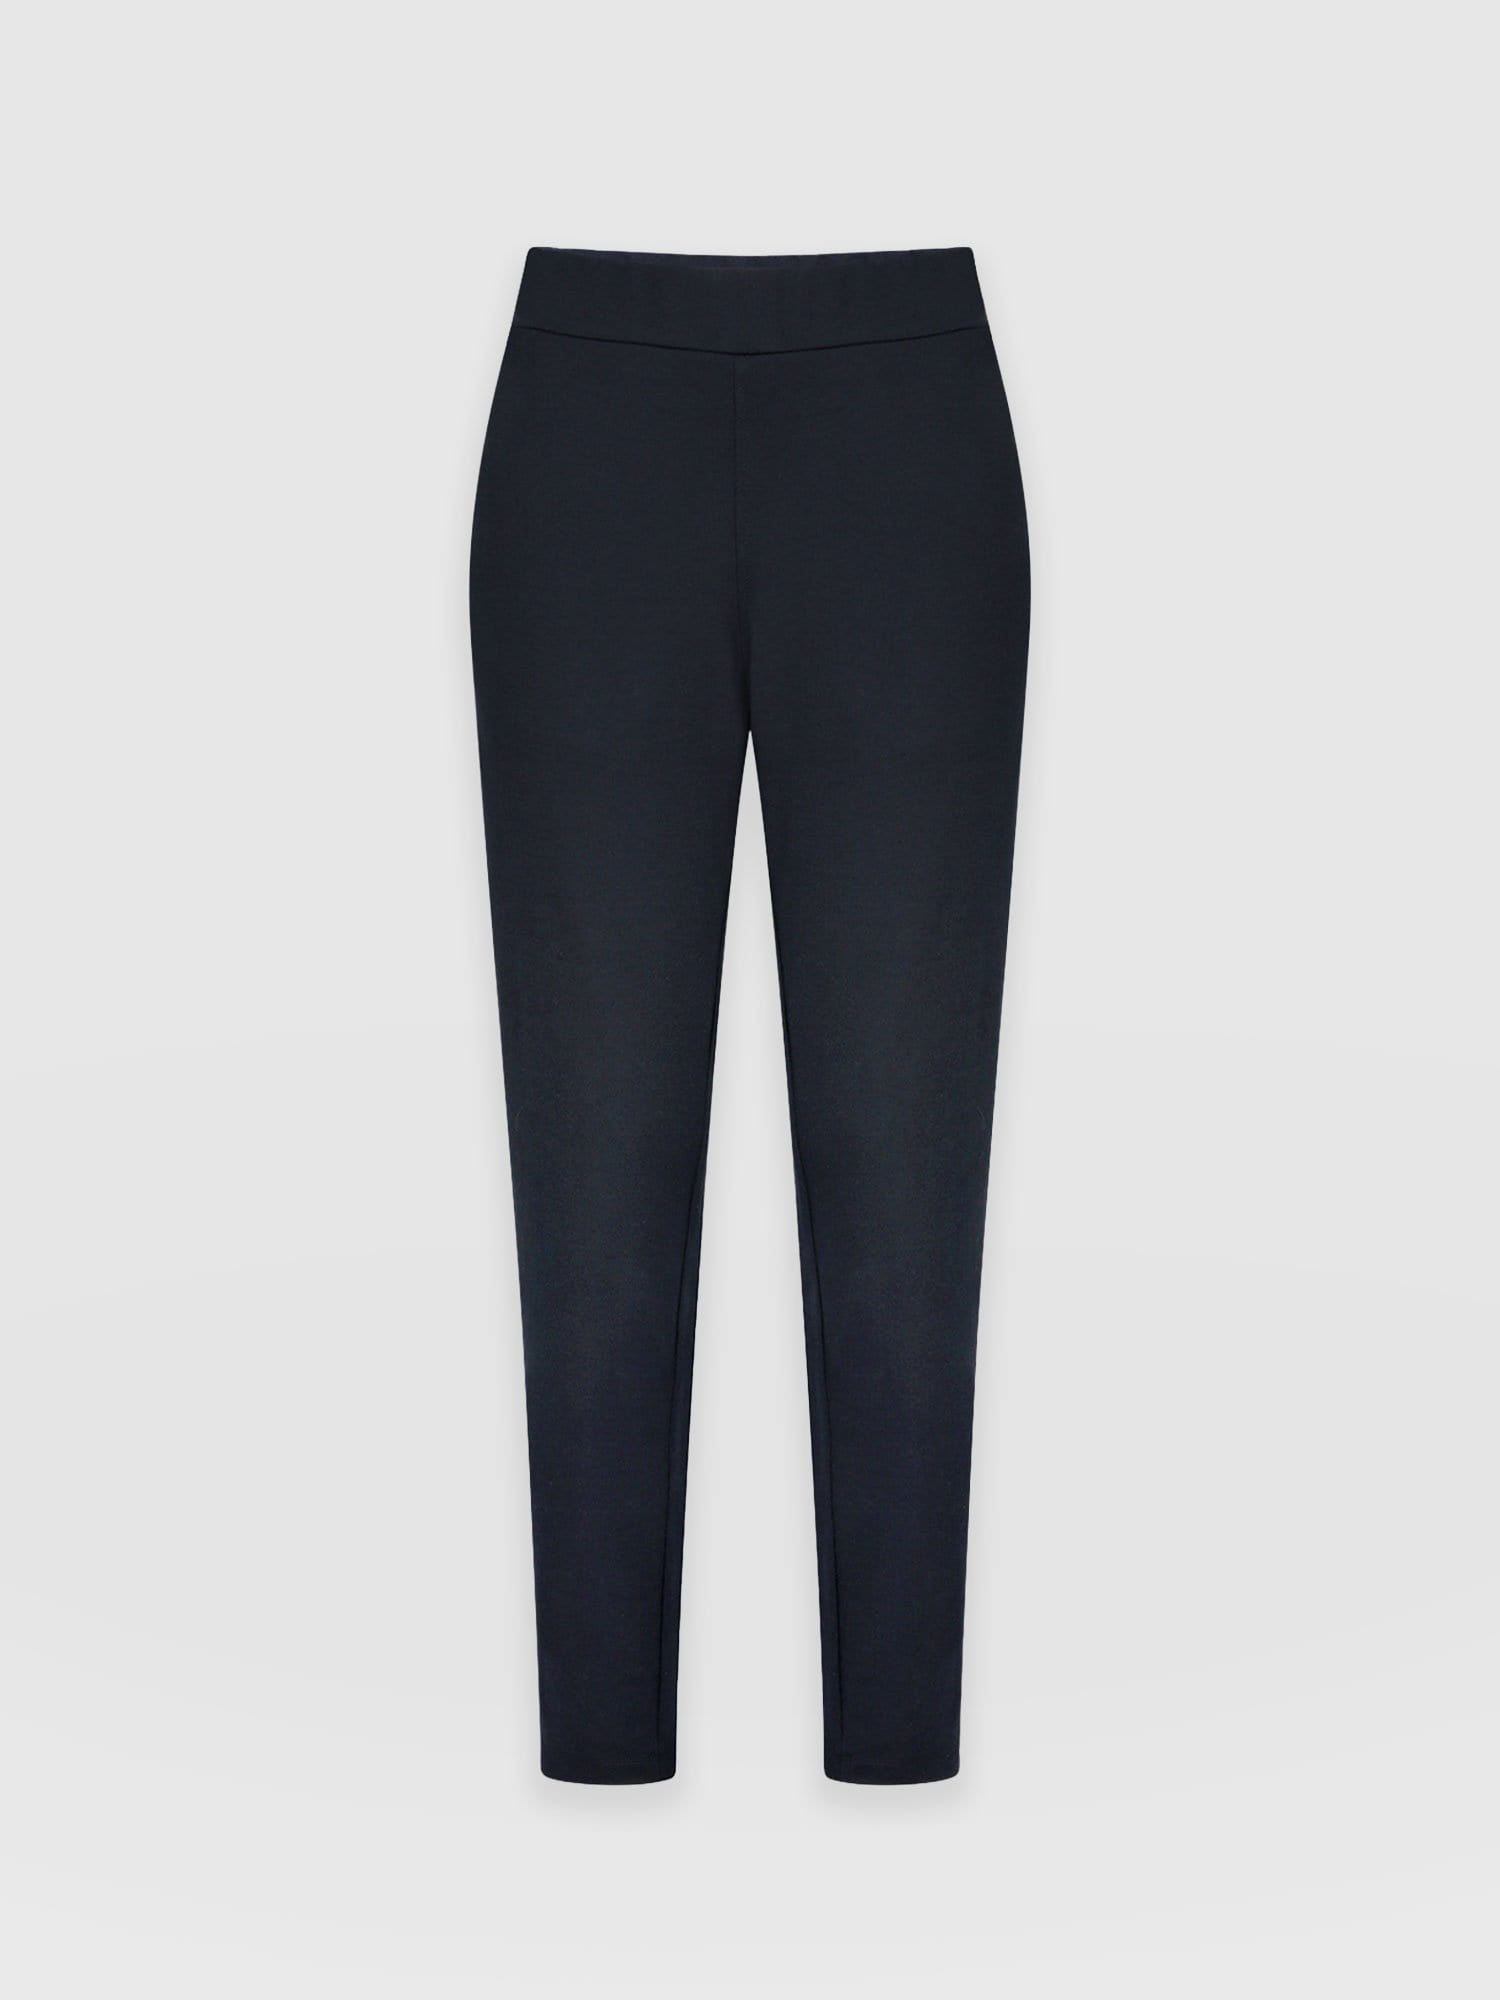 Women's Grey Trousers: Buy Business Wear, Corporate Clothing and Staff  Uniforms.